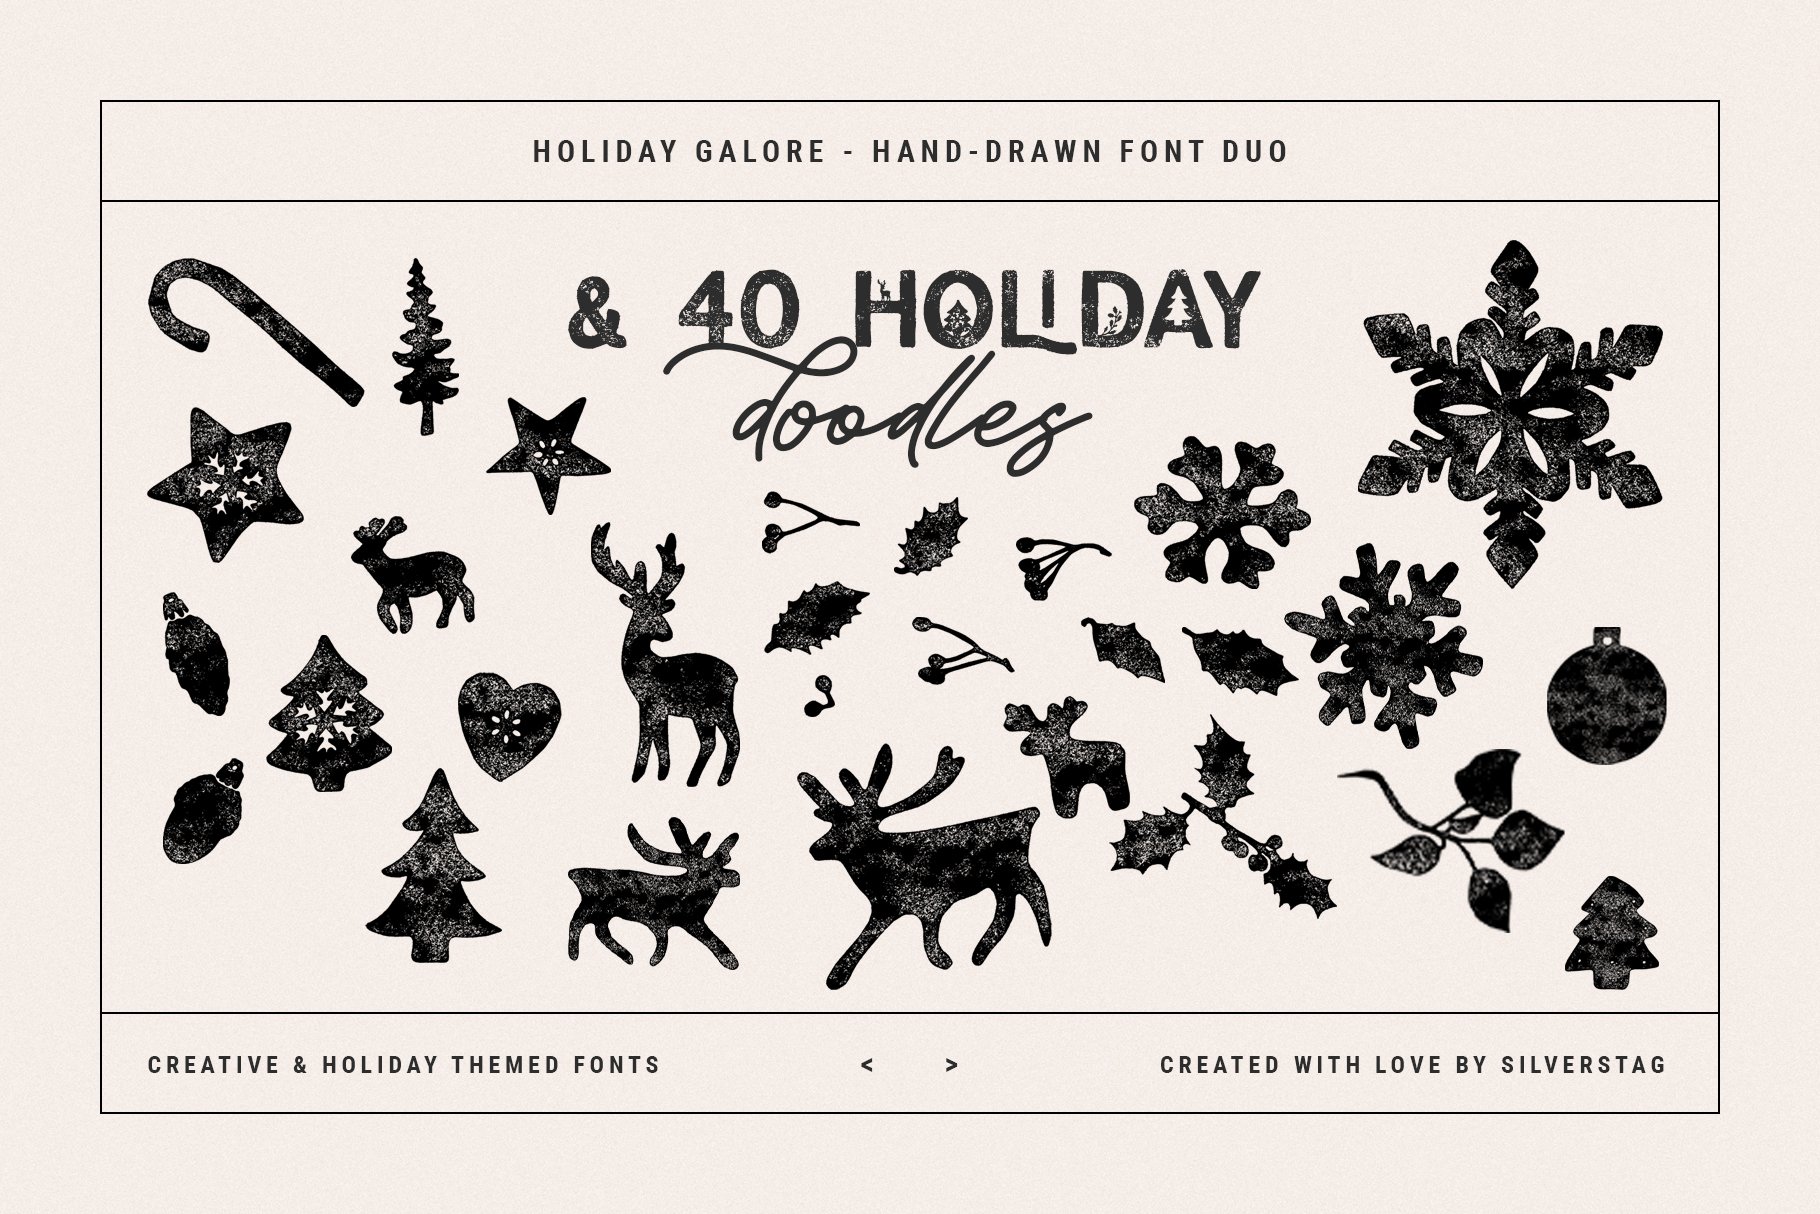 36 holiday galore font duo by silver stag 337